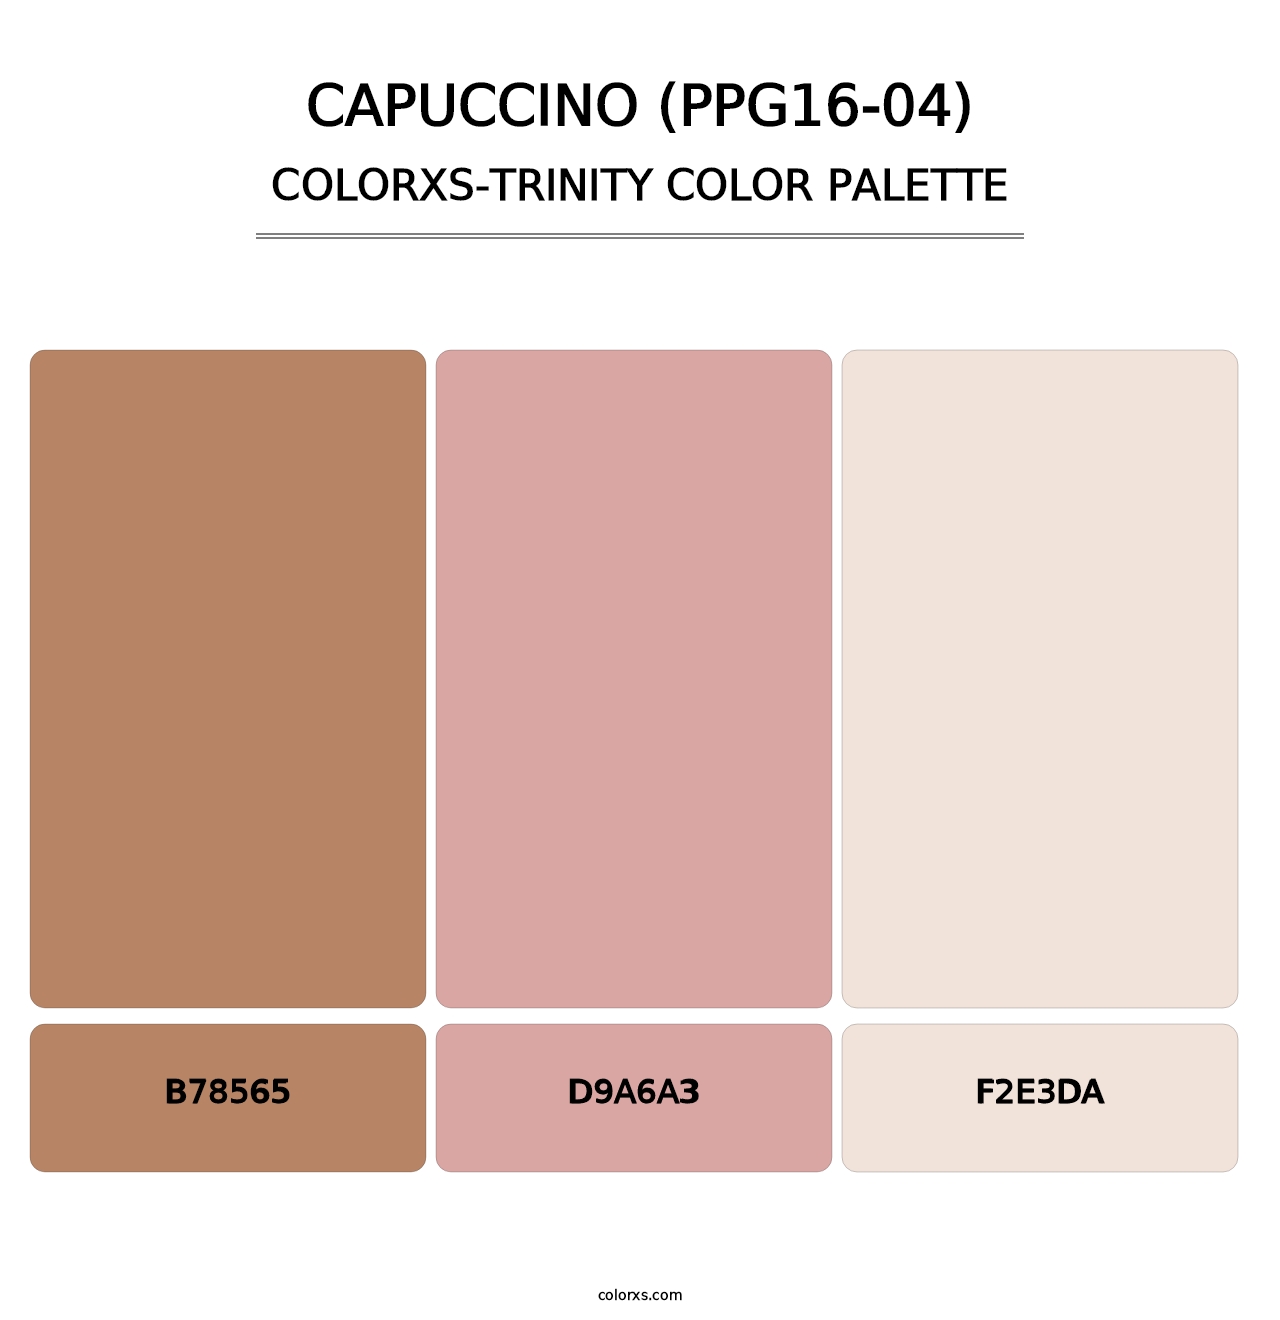 Capuccino (PPG16-04) - Colorxs Trinity Palette